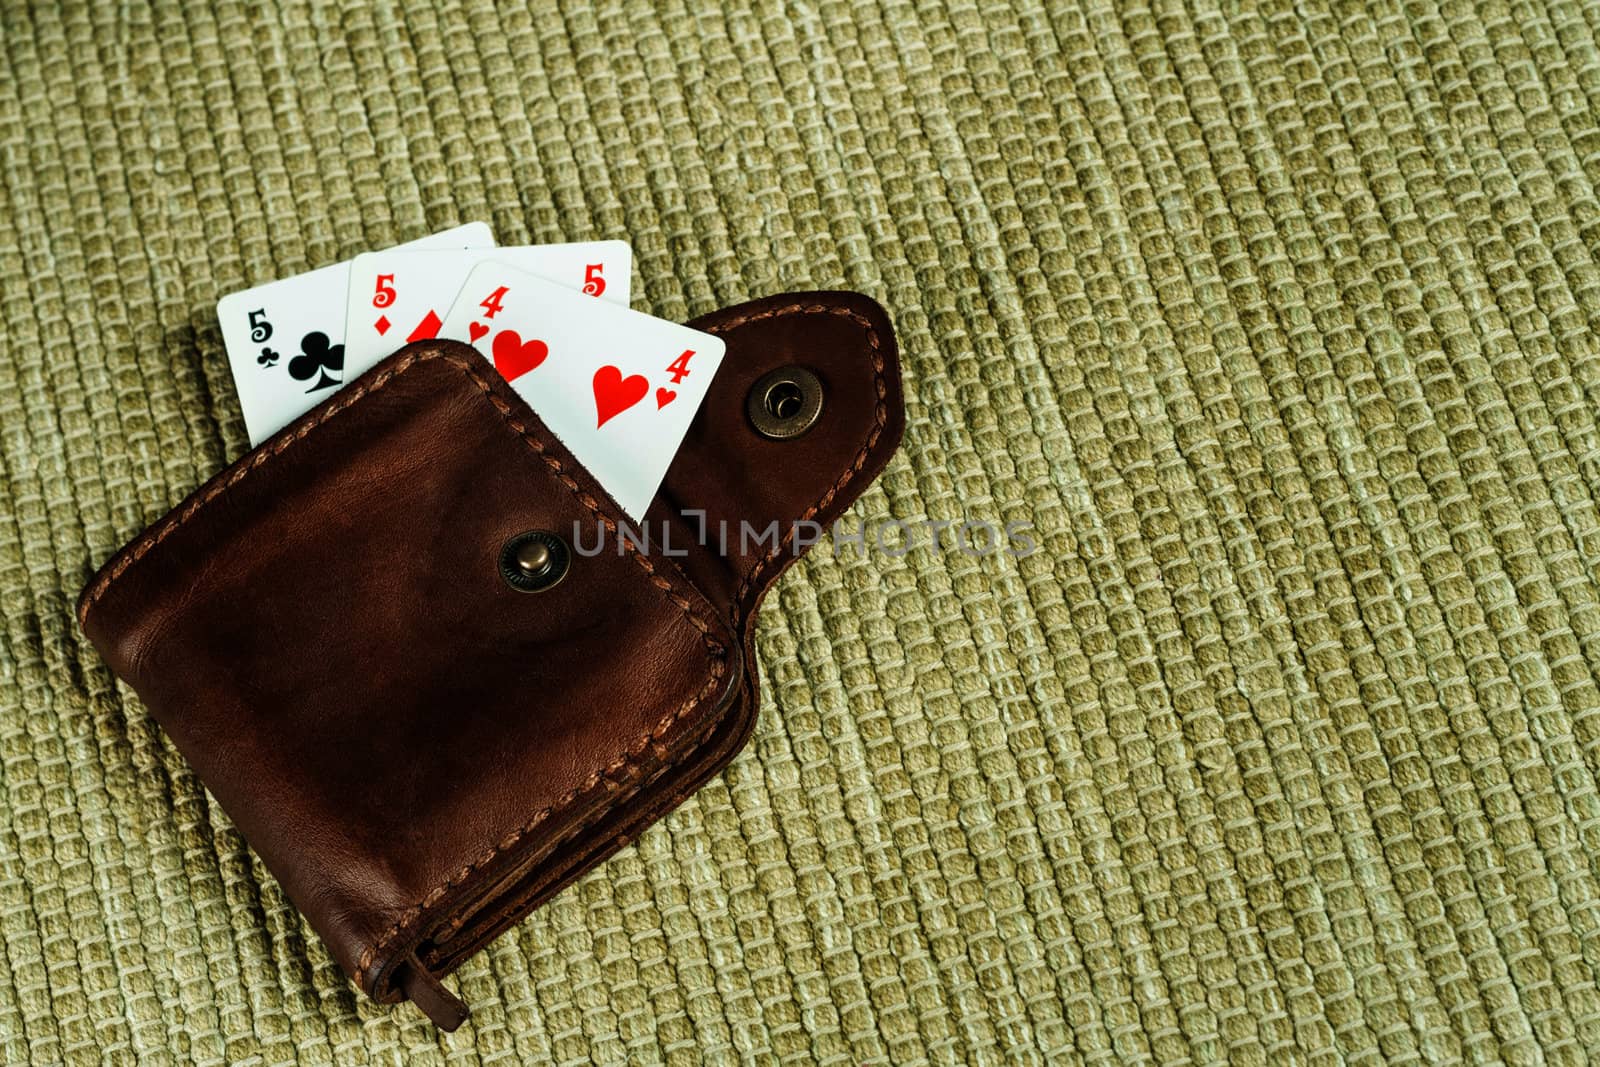 Purse made of leather and playing cards by dedron